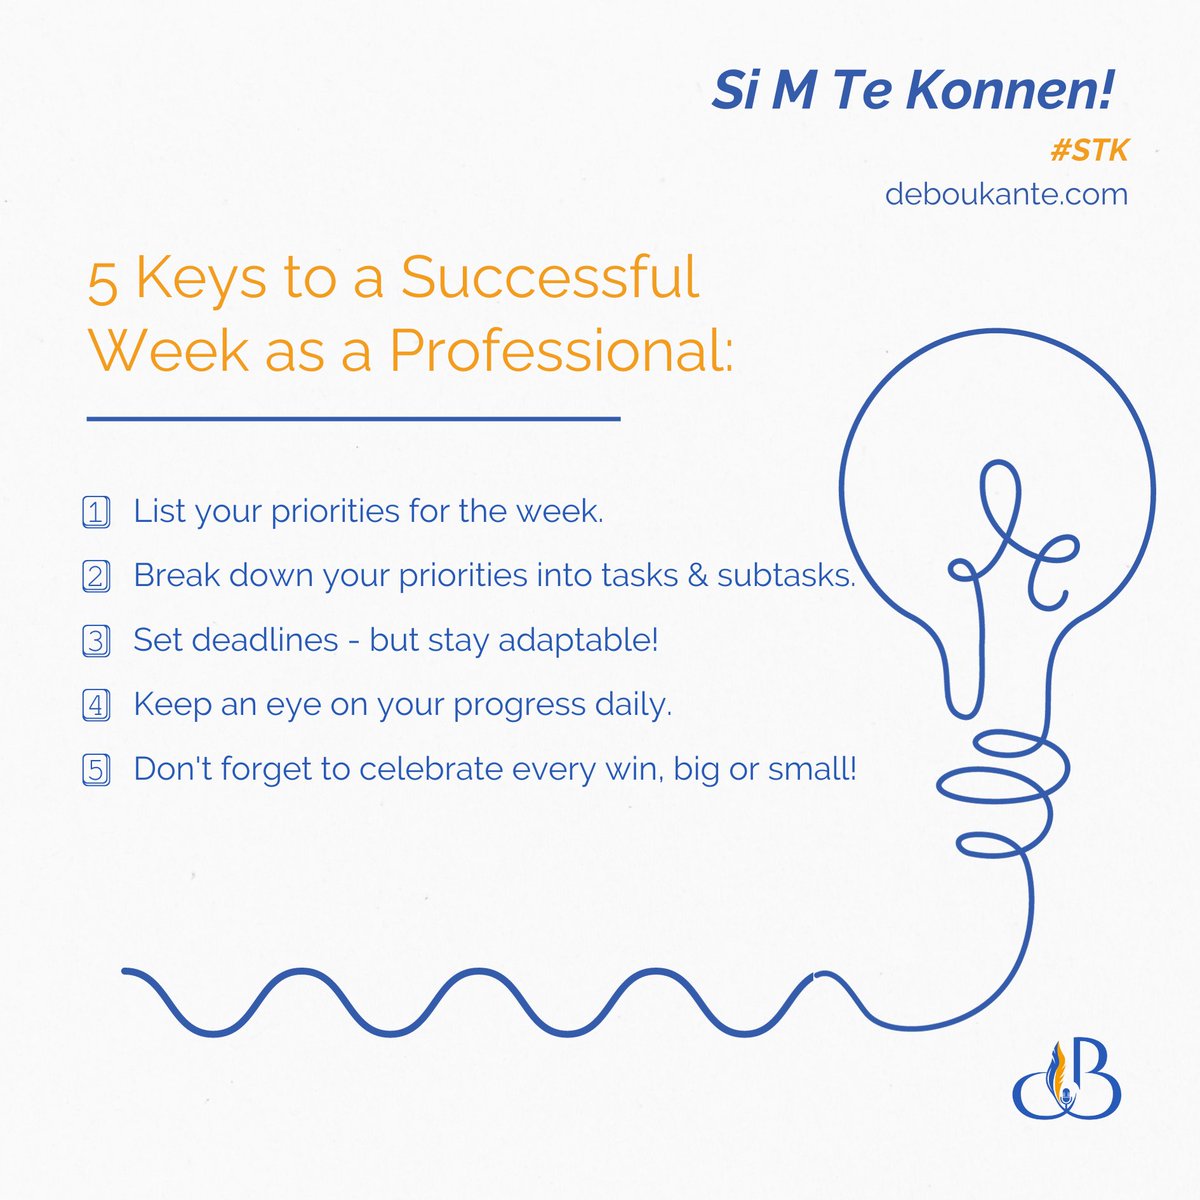 If only I knew how to plan a successful week! 
Check out these 5 keys to a professionally successful week!
🔑📈✨

#ProfessionalGrowth #SuccessTips #WeeklyPlanning #AchieveMore #StayMotivated #STK